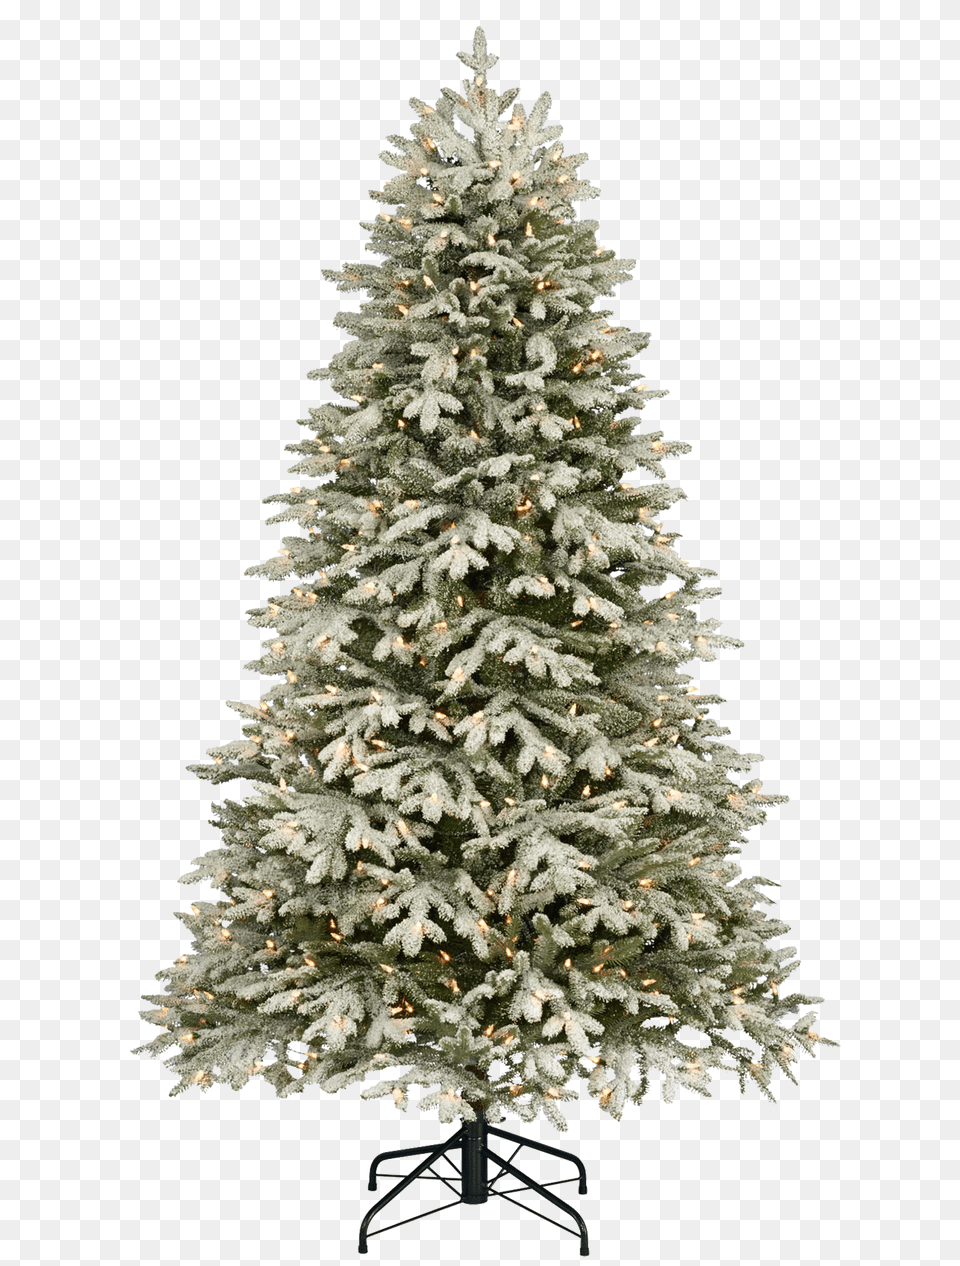 Christmas Tree With Snow Image Different Types Of Christmas Trees, Plant, Pine, Christmas Decorations, Festival Free Png